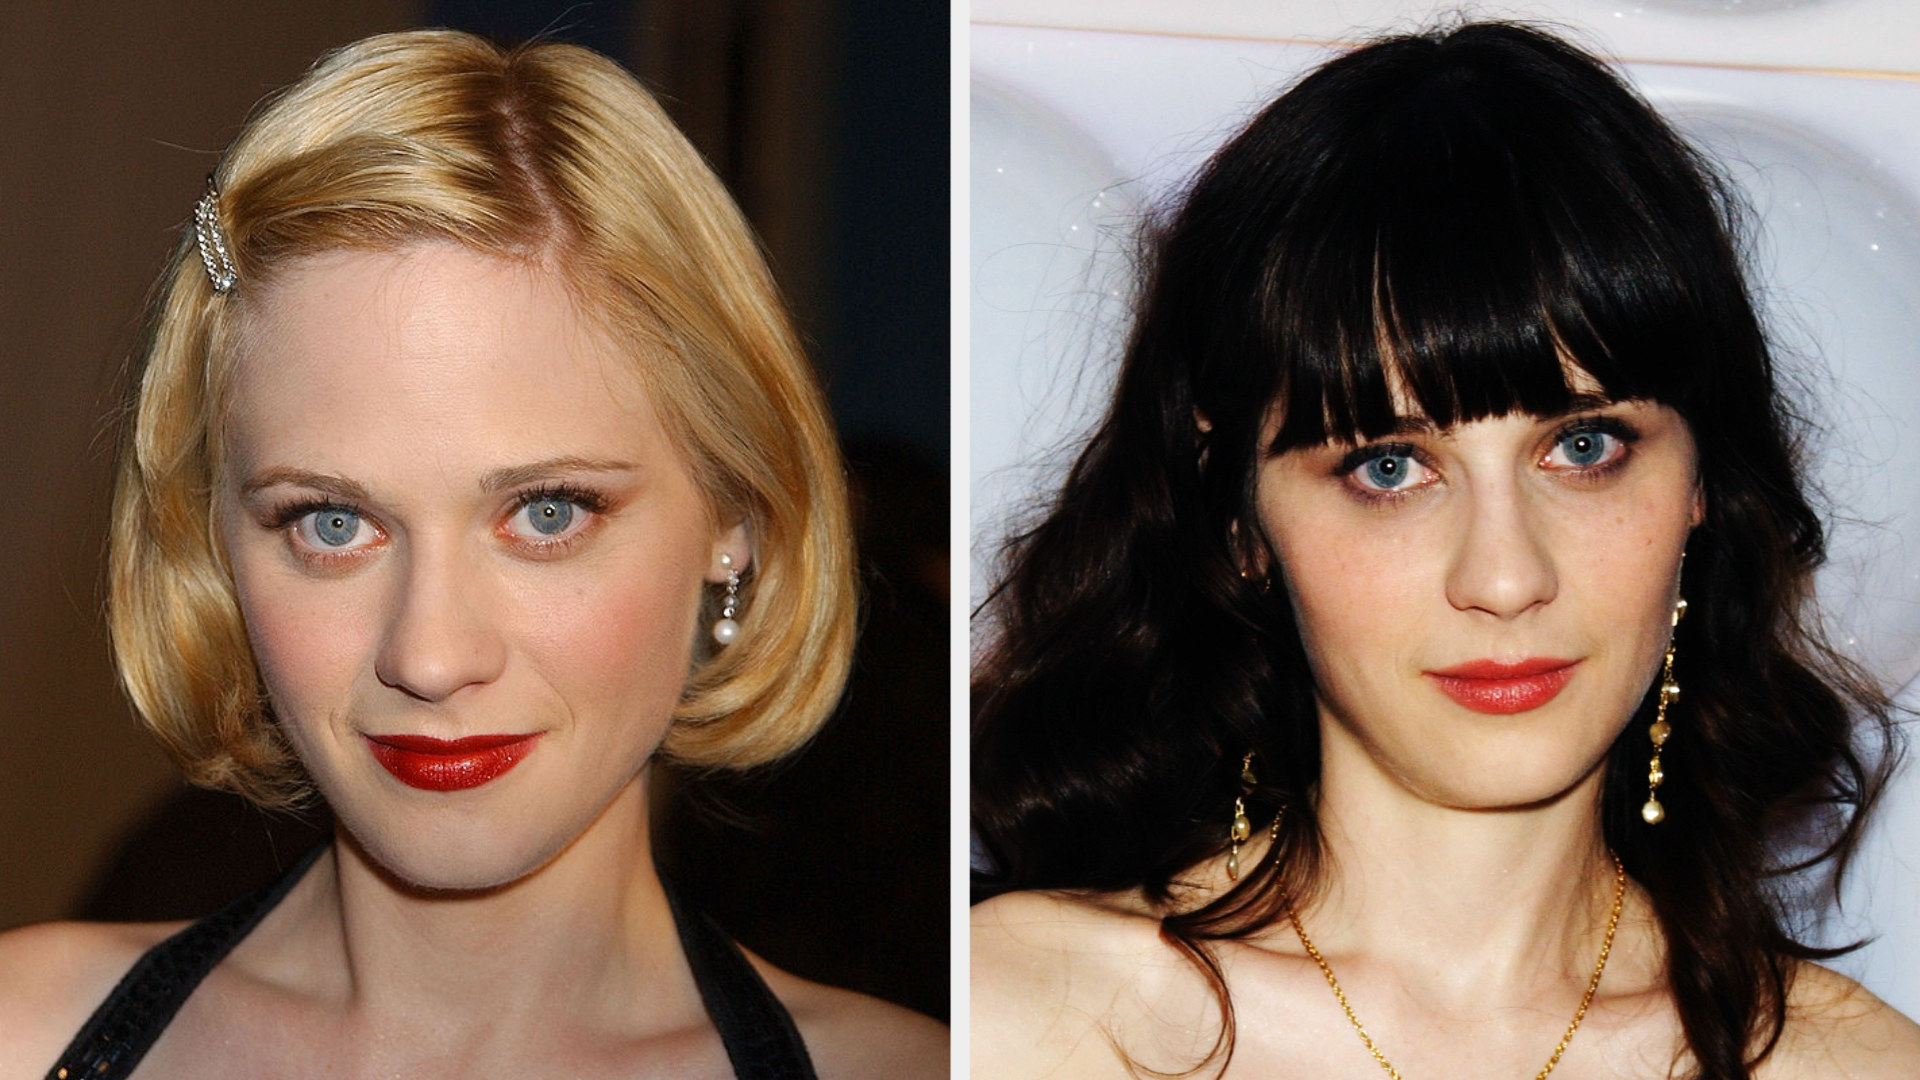 Zooey with short blonde hair and Zooey with black hair and bangs